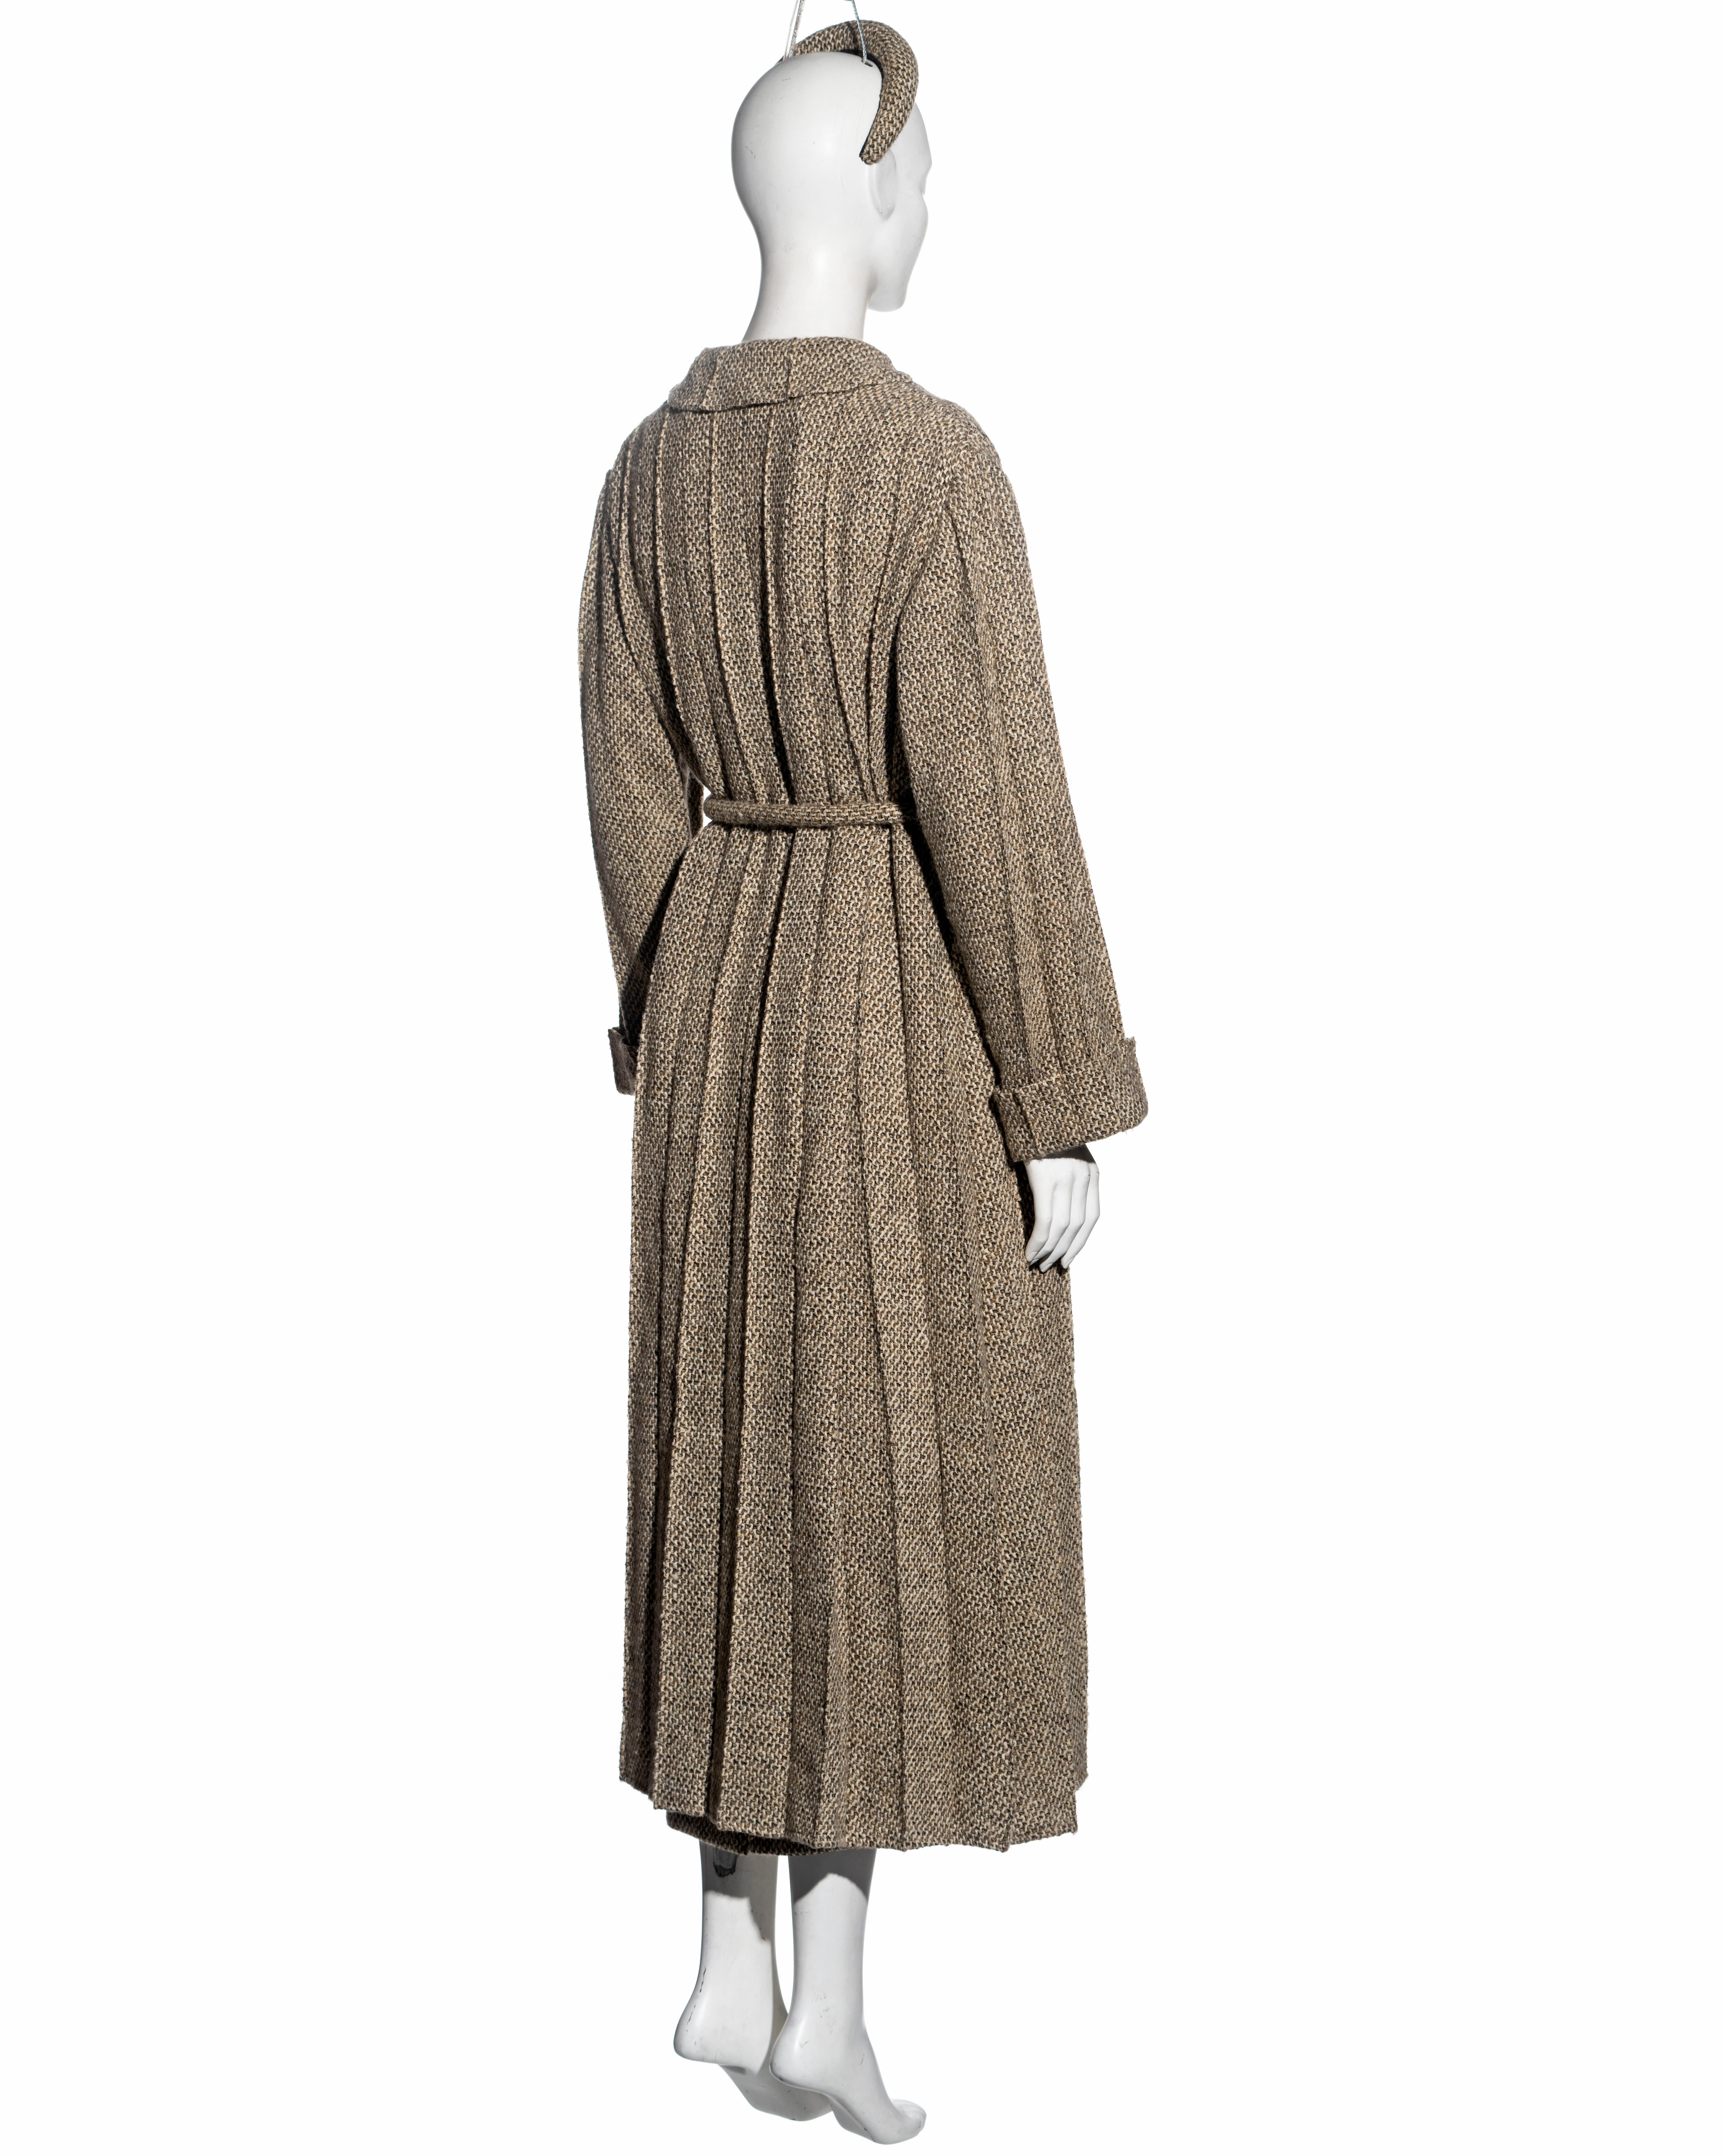 Chanel by Karl Lagerfeld brown tweed pleated coat, skirt and hat set, fw 1998 For Sale 4